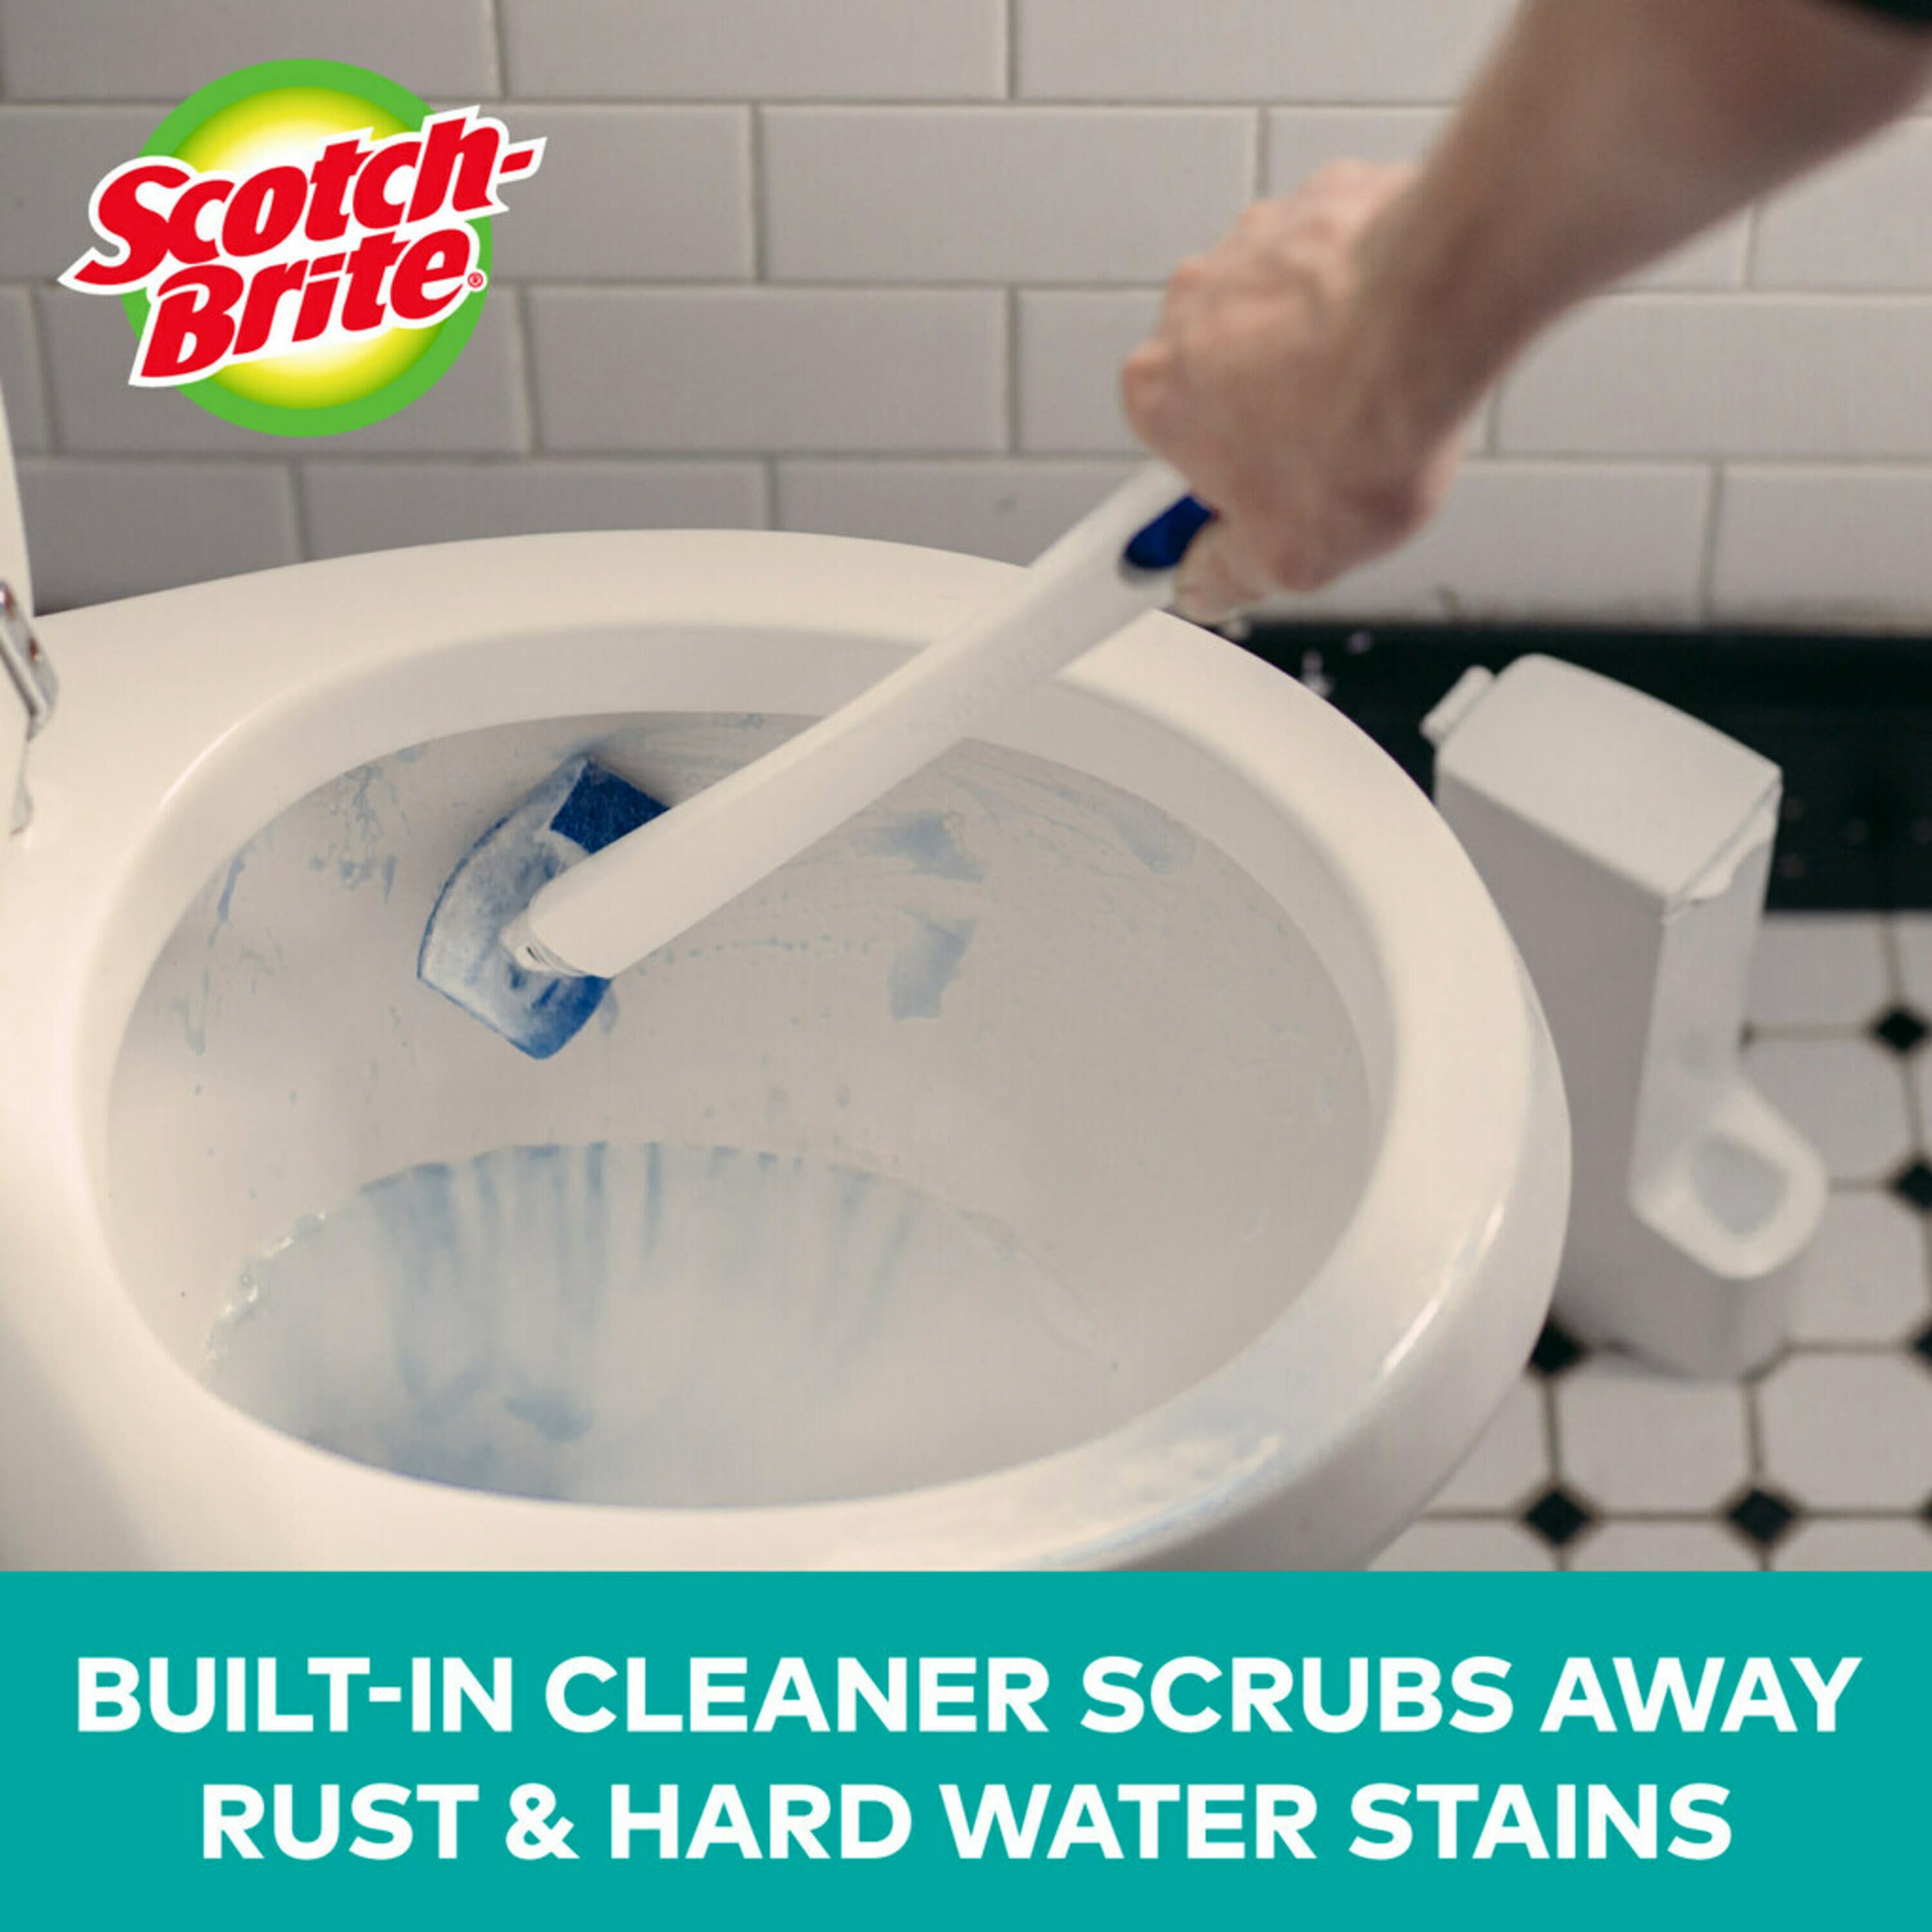 Scotch-brite Scrub & Drop Dissolvable Toilet Bowl Cleaning System - 1 Wand  & Stand And 4 Dissolvable Refill Tablets : Target